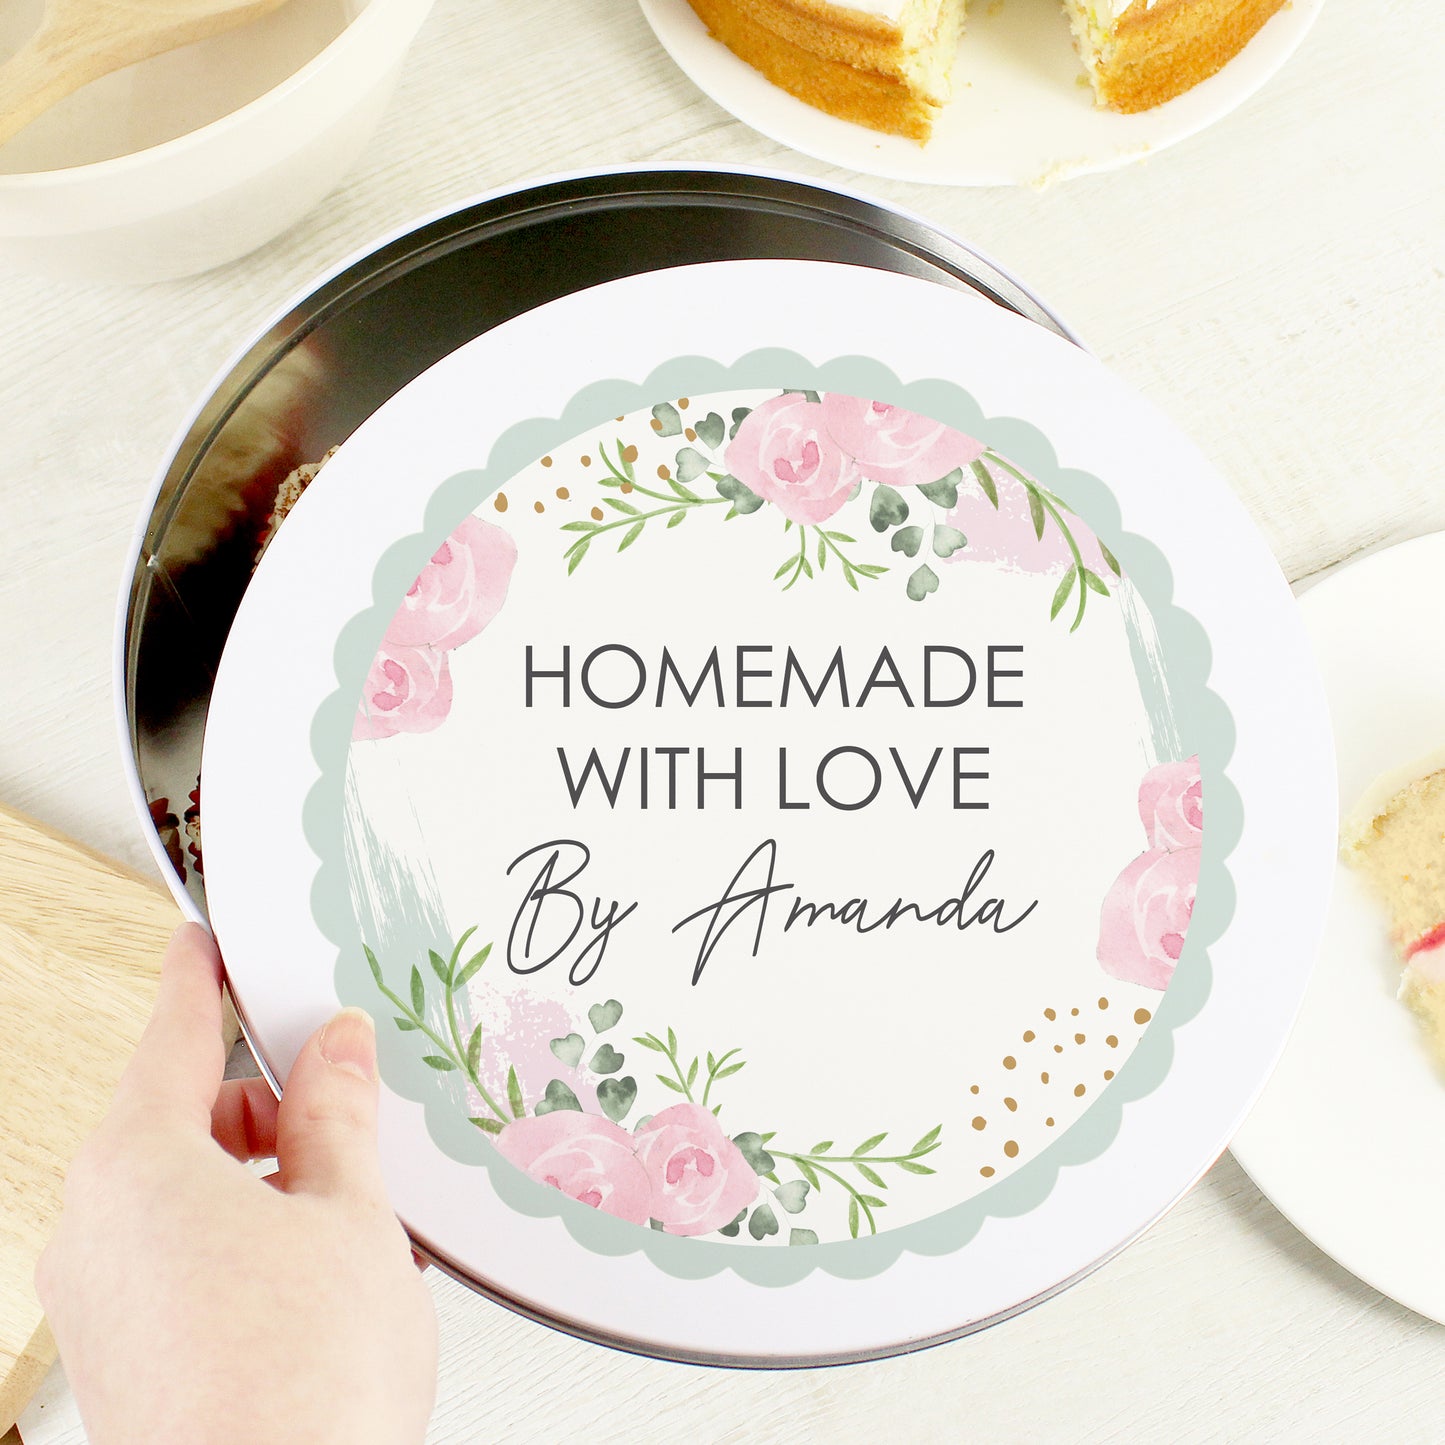 Personalised Floral Cake Tin that says "HOMEMADE WITH LOVE By Amanda"